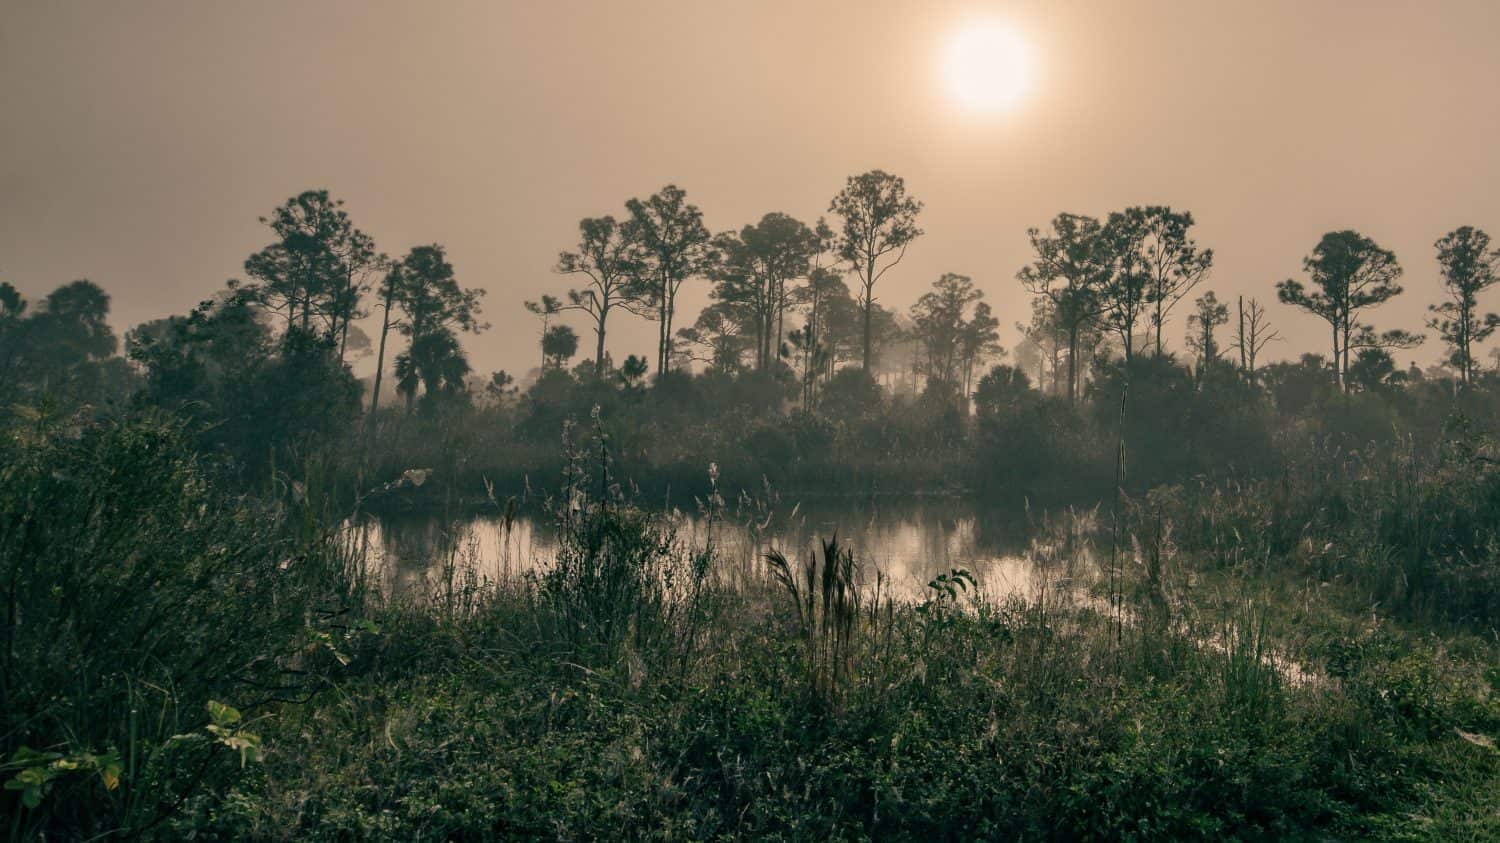 Foggy Morning in the Everglades Swamp | Big Cypress National Preserve, Florida, USA